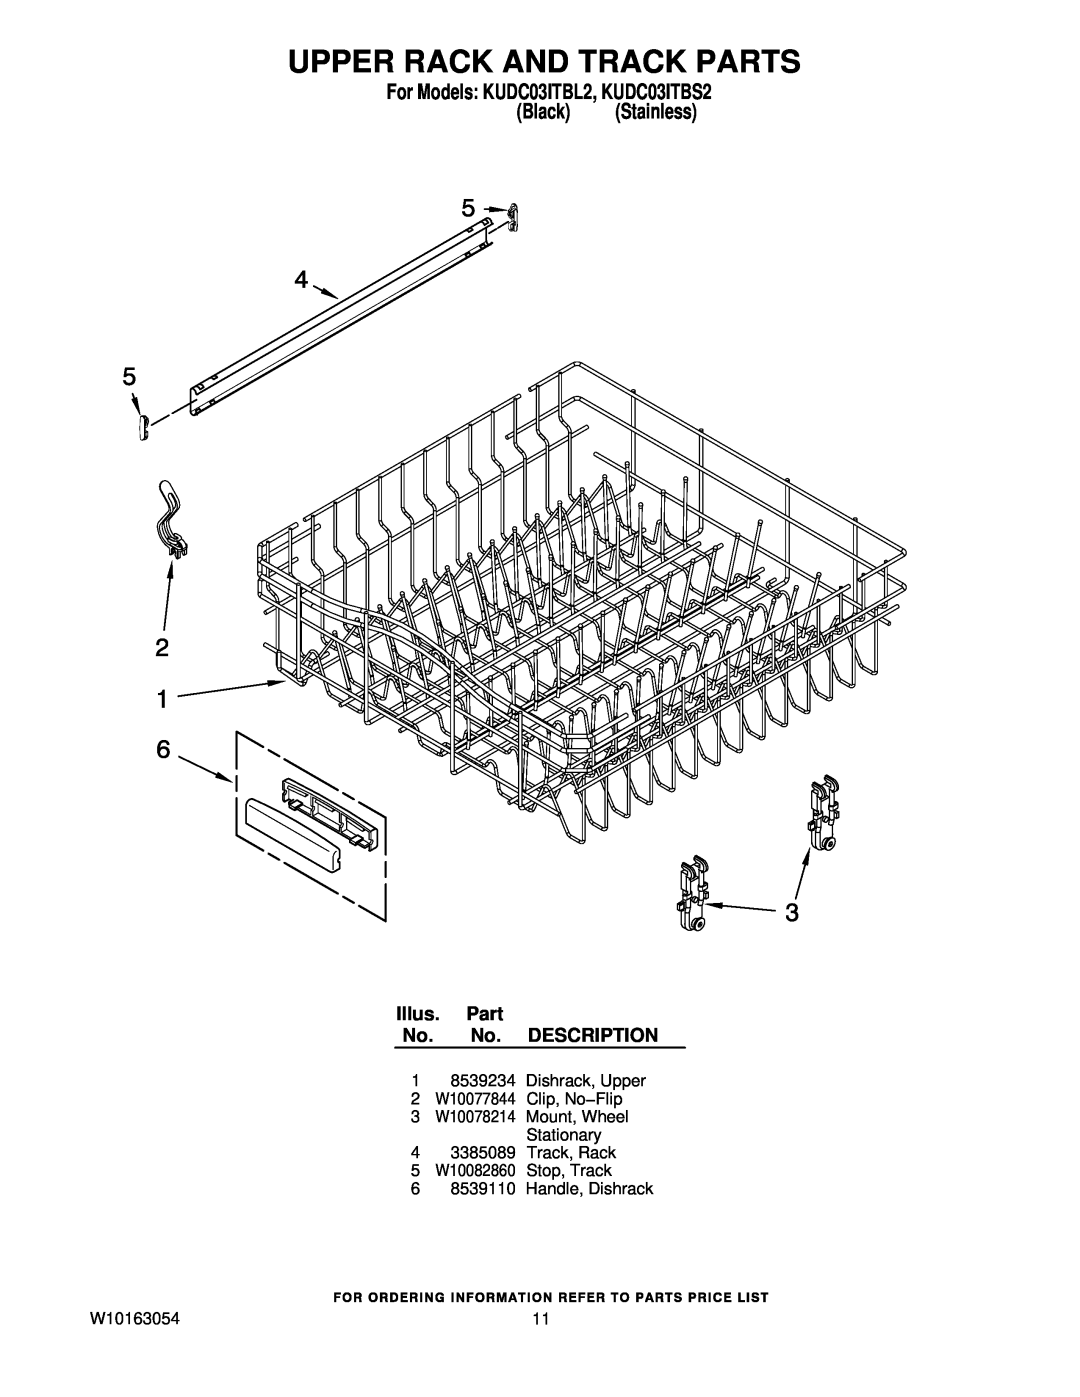 KitchenAid manual Upper Rack And Track Parts, For Models KUDC03ITBL2, KUDC03ITBS2 Black Stainless 